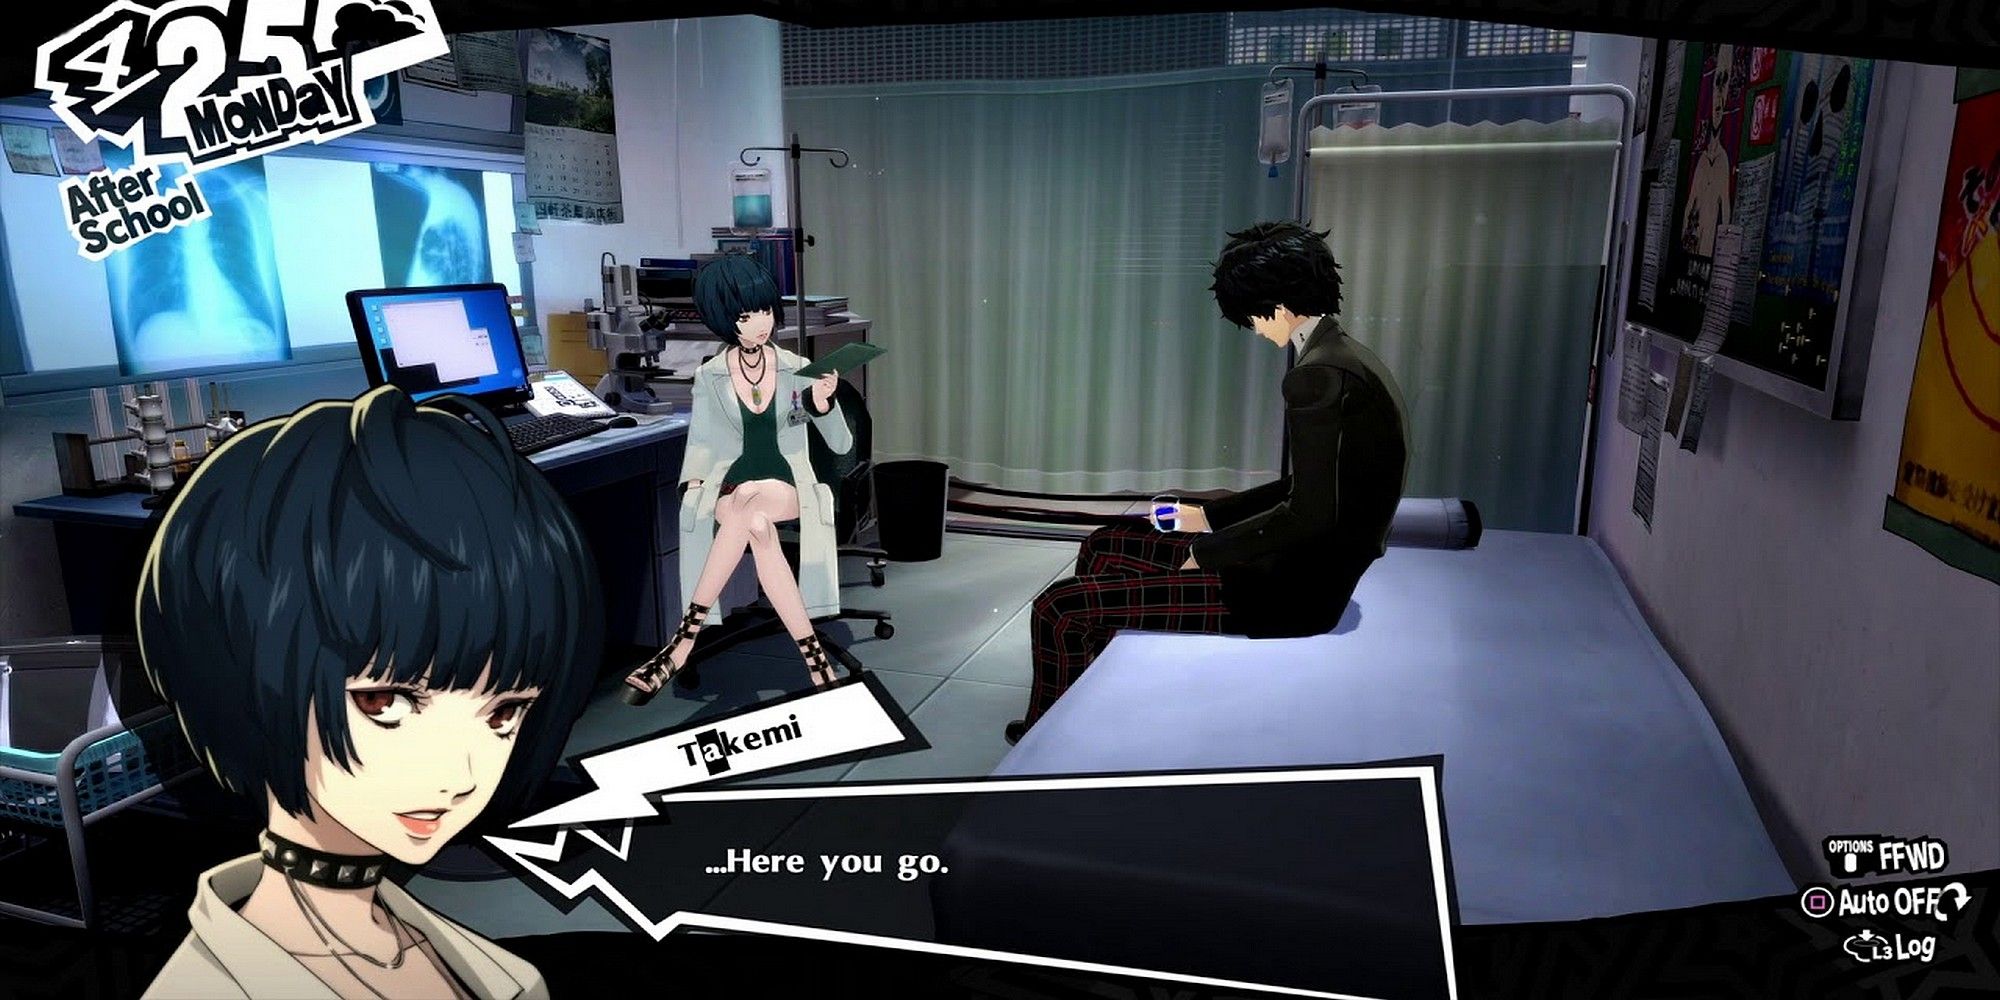 Persona 5 Tae Takemi and Joker at the Clinic